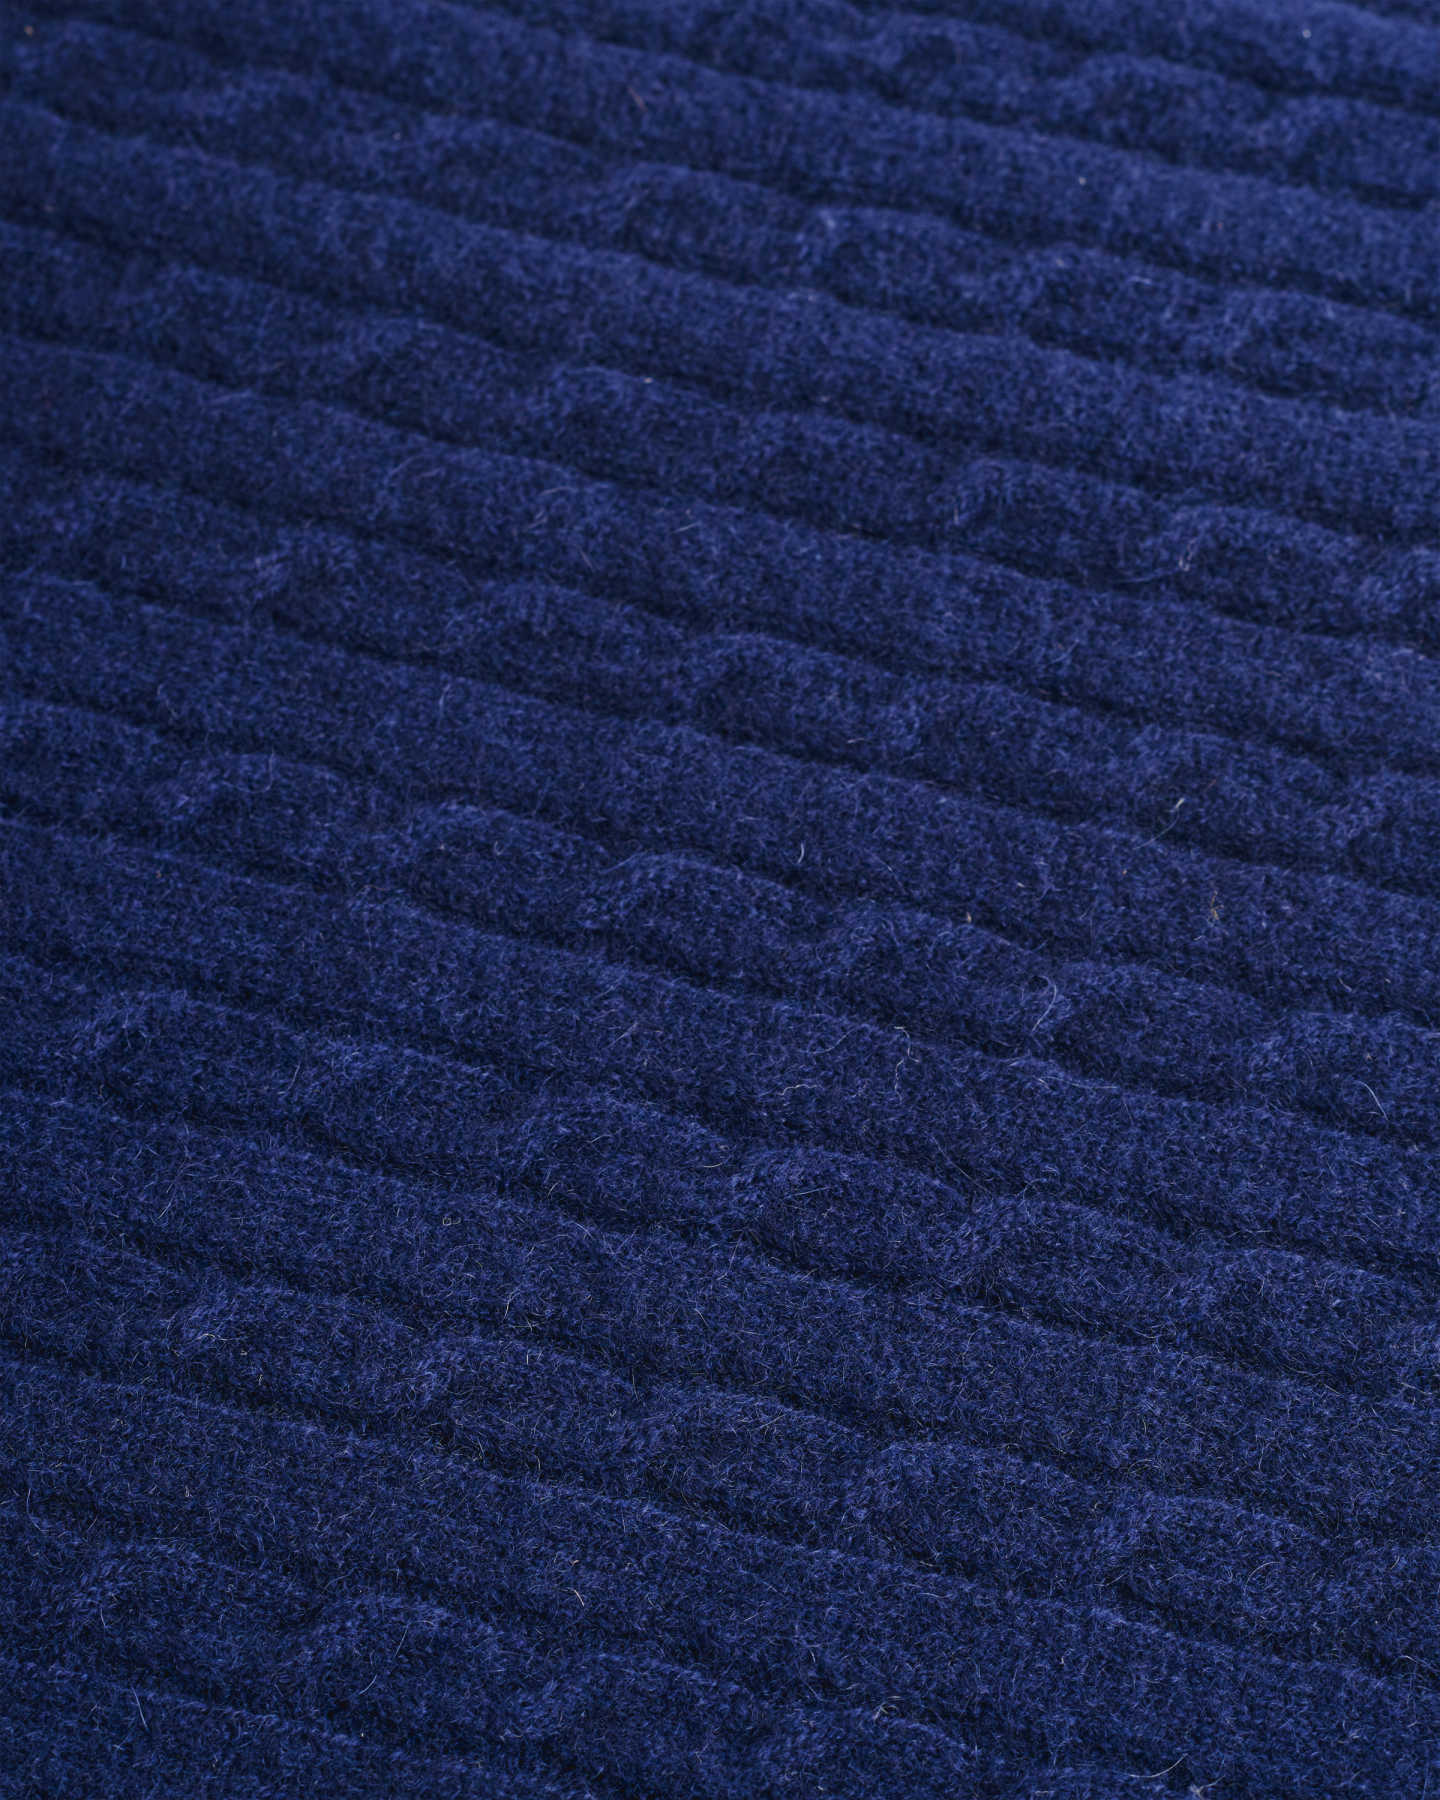 Cable Knit Cashmere Throw - Navy - 1 - Thumbnail